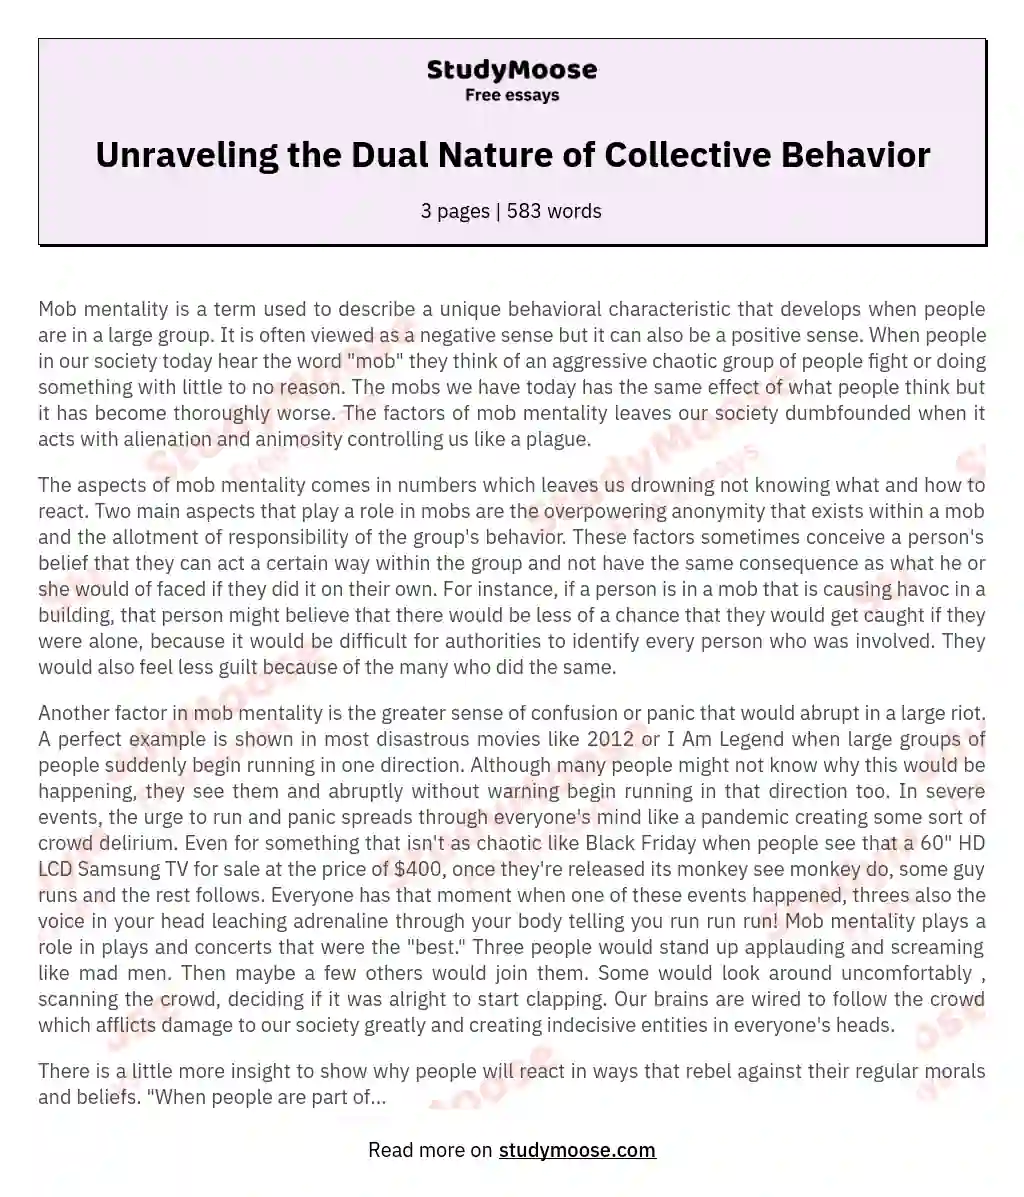 Unraveling the Dual Nature of Collective Behavior essay